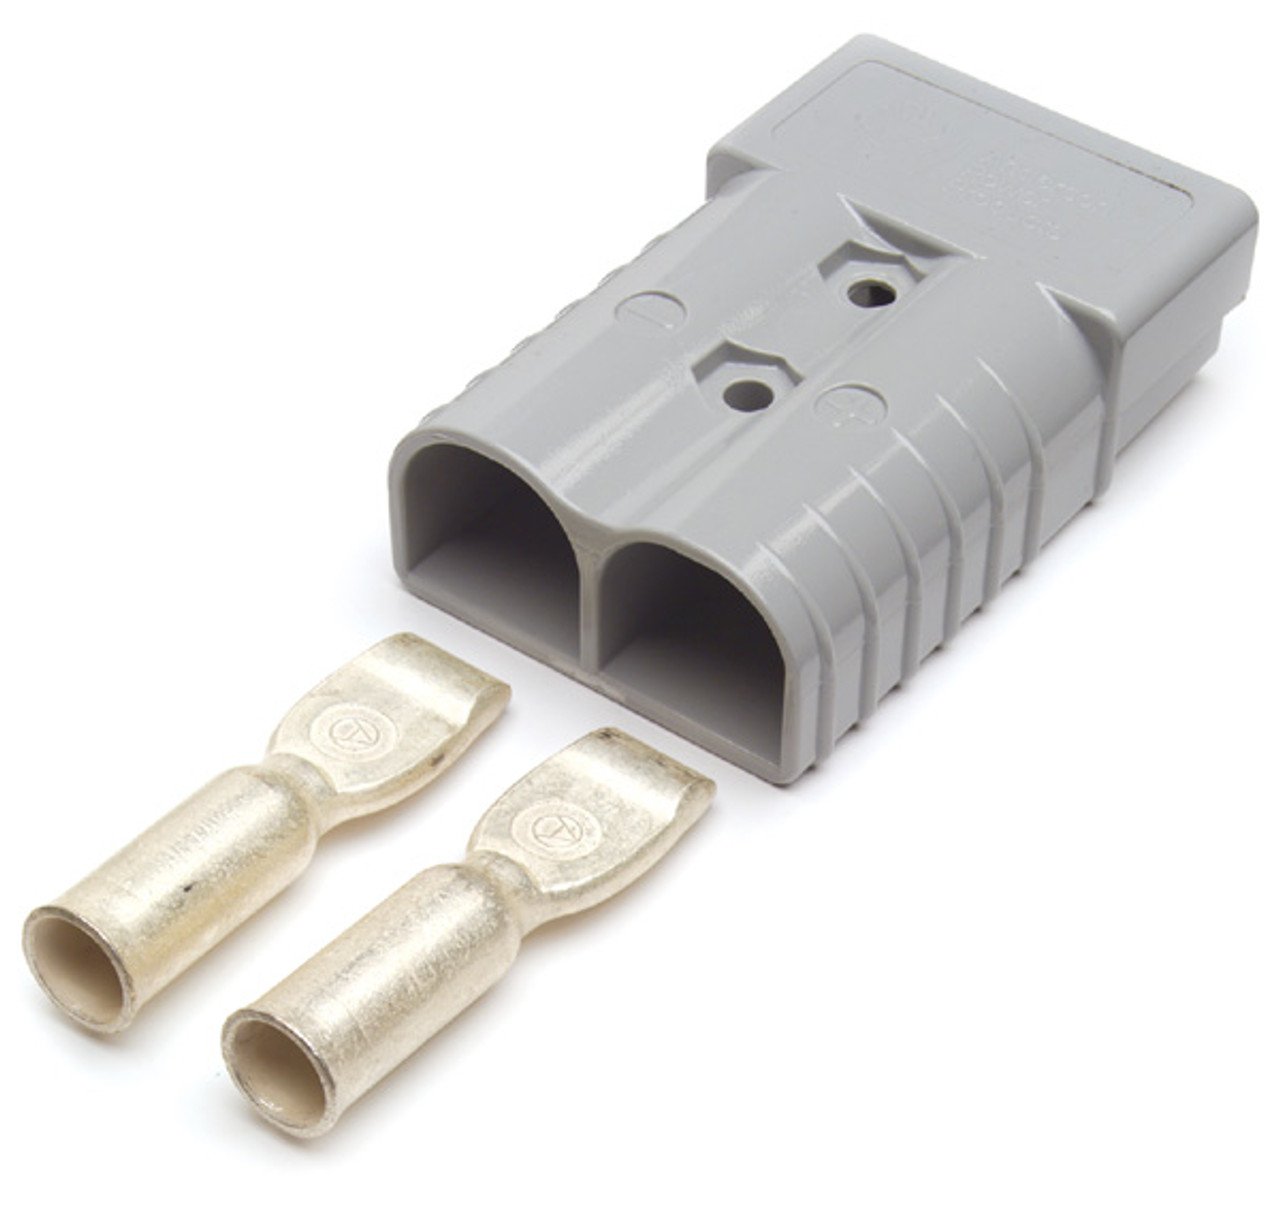 2/0 350A AWG Plug-In Style Battery Cable Connectors Plug-In End - Gray  84-9485